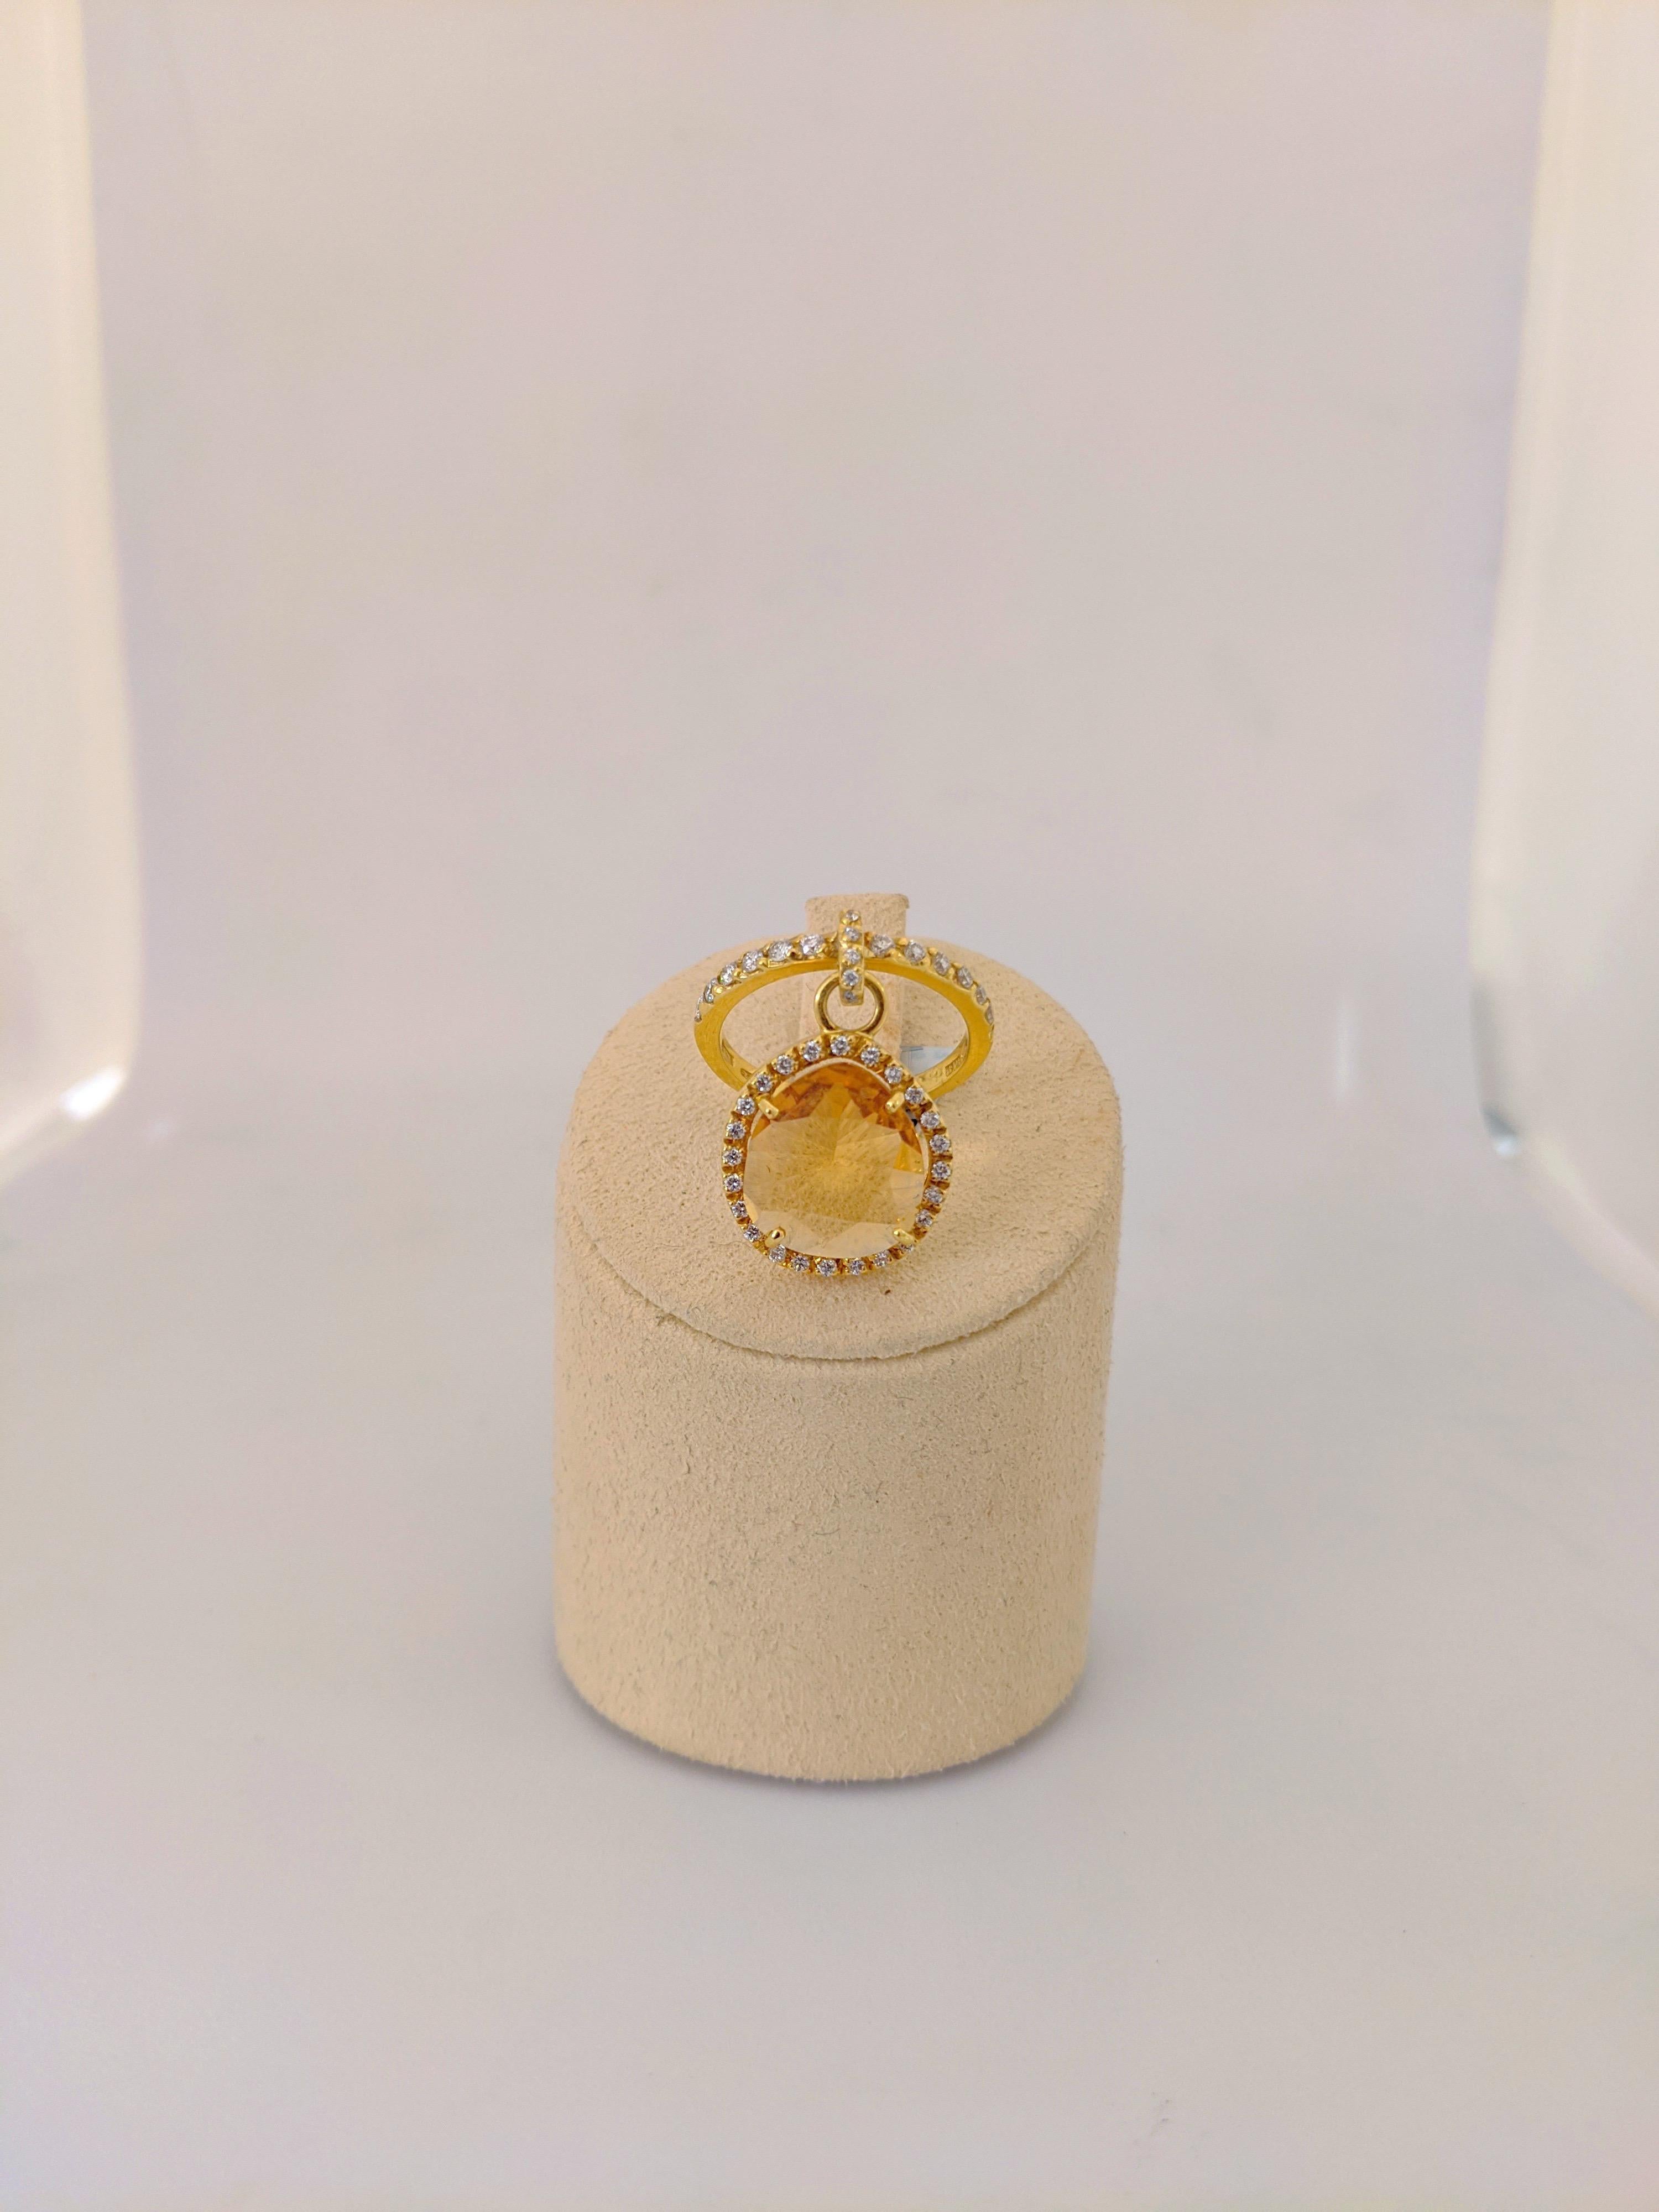 Modern Cellini Jewelers 18 Karat Gold Ring with Diamonds and .90ct Pear Shaped Citrine For Sale